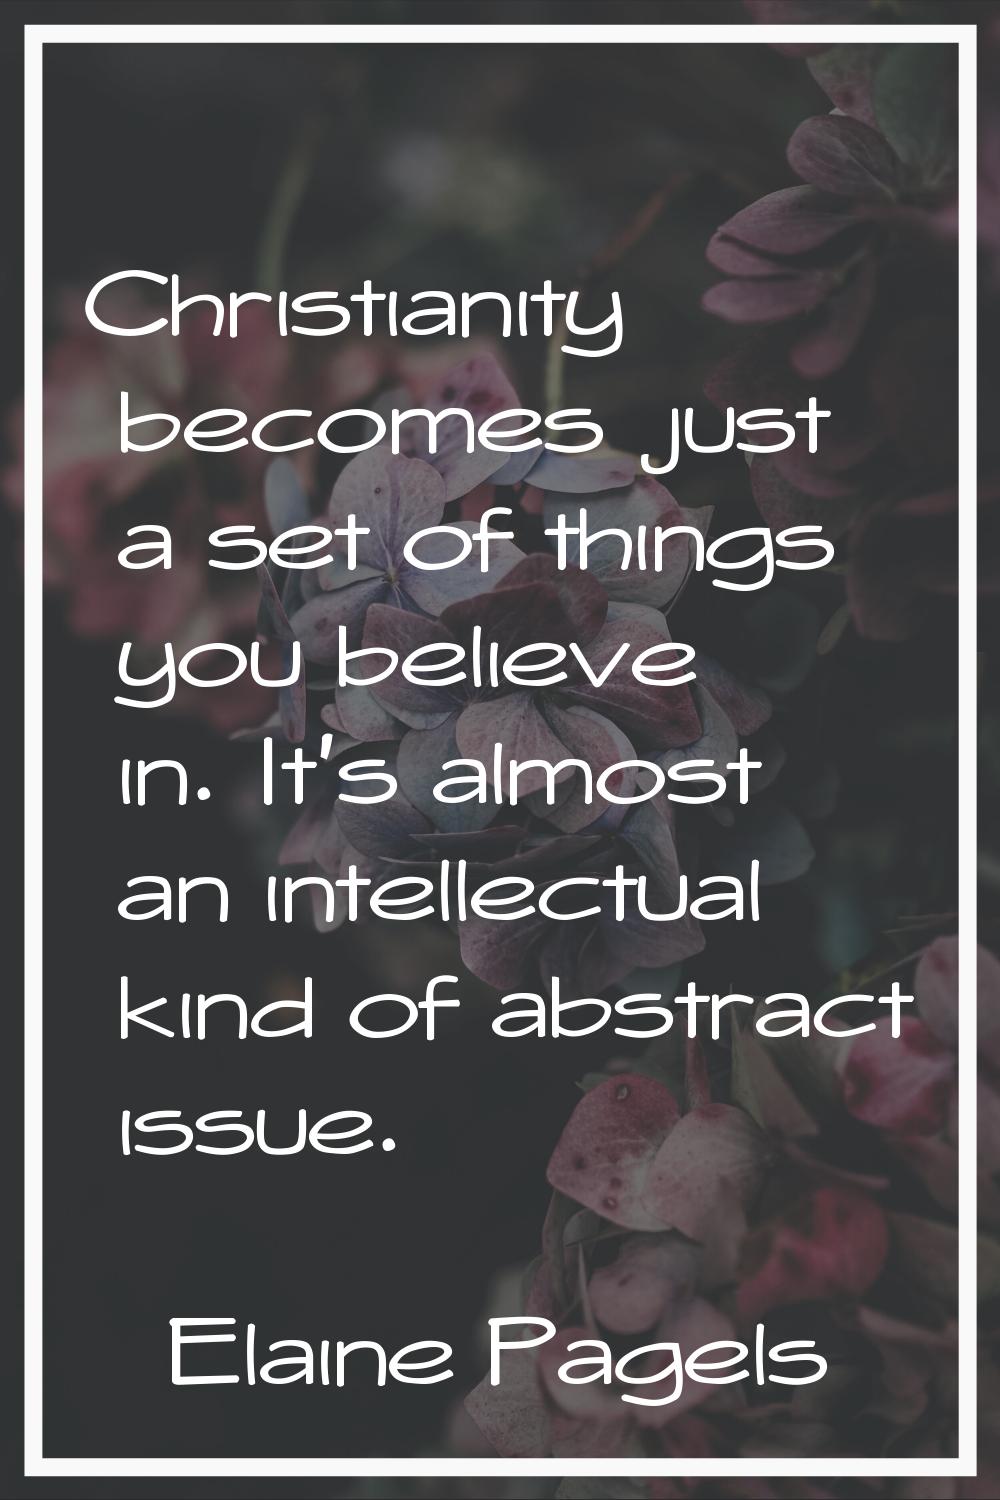 Christianity becomes just a set of things you believe in. It's almost an intellectual kind of abstr